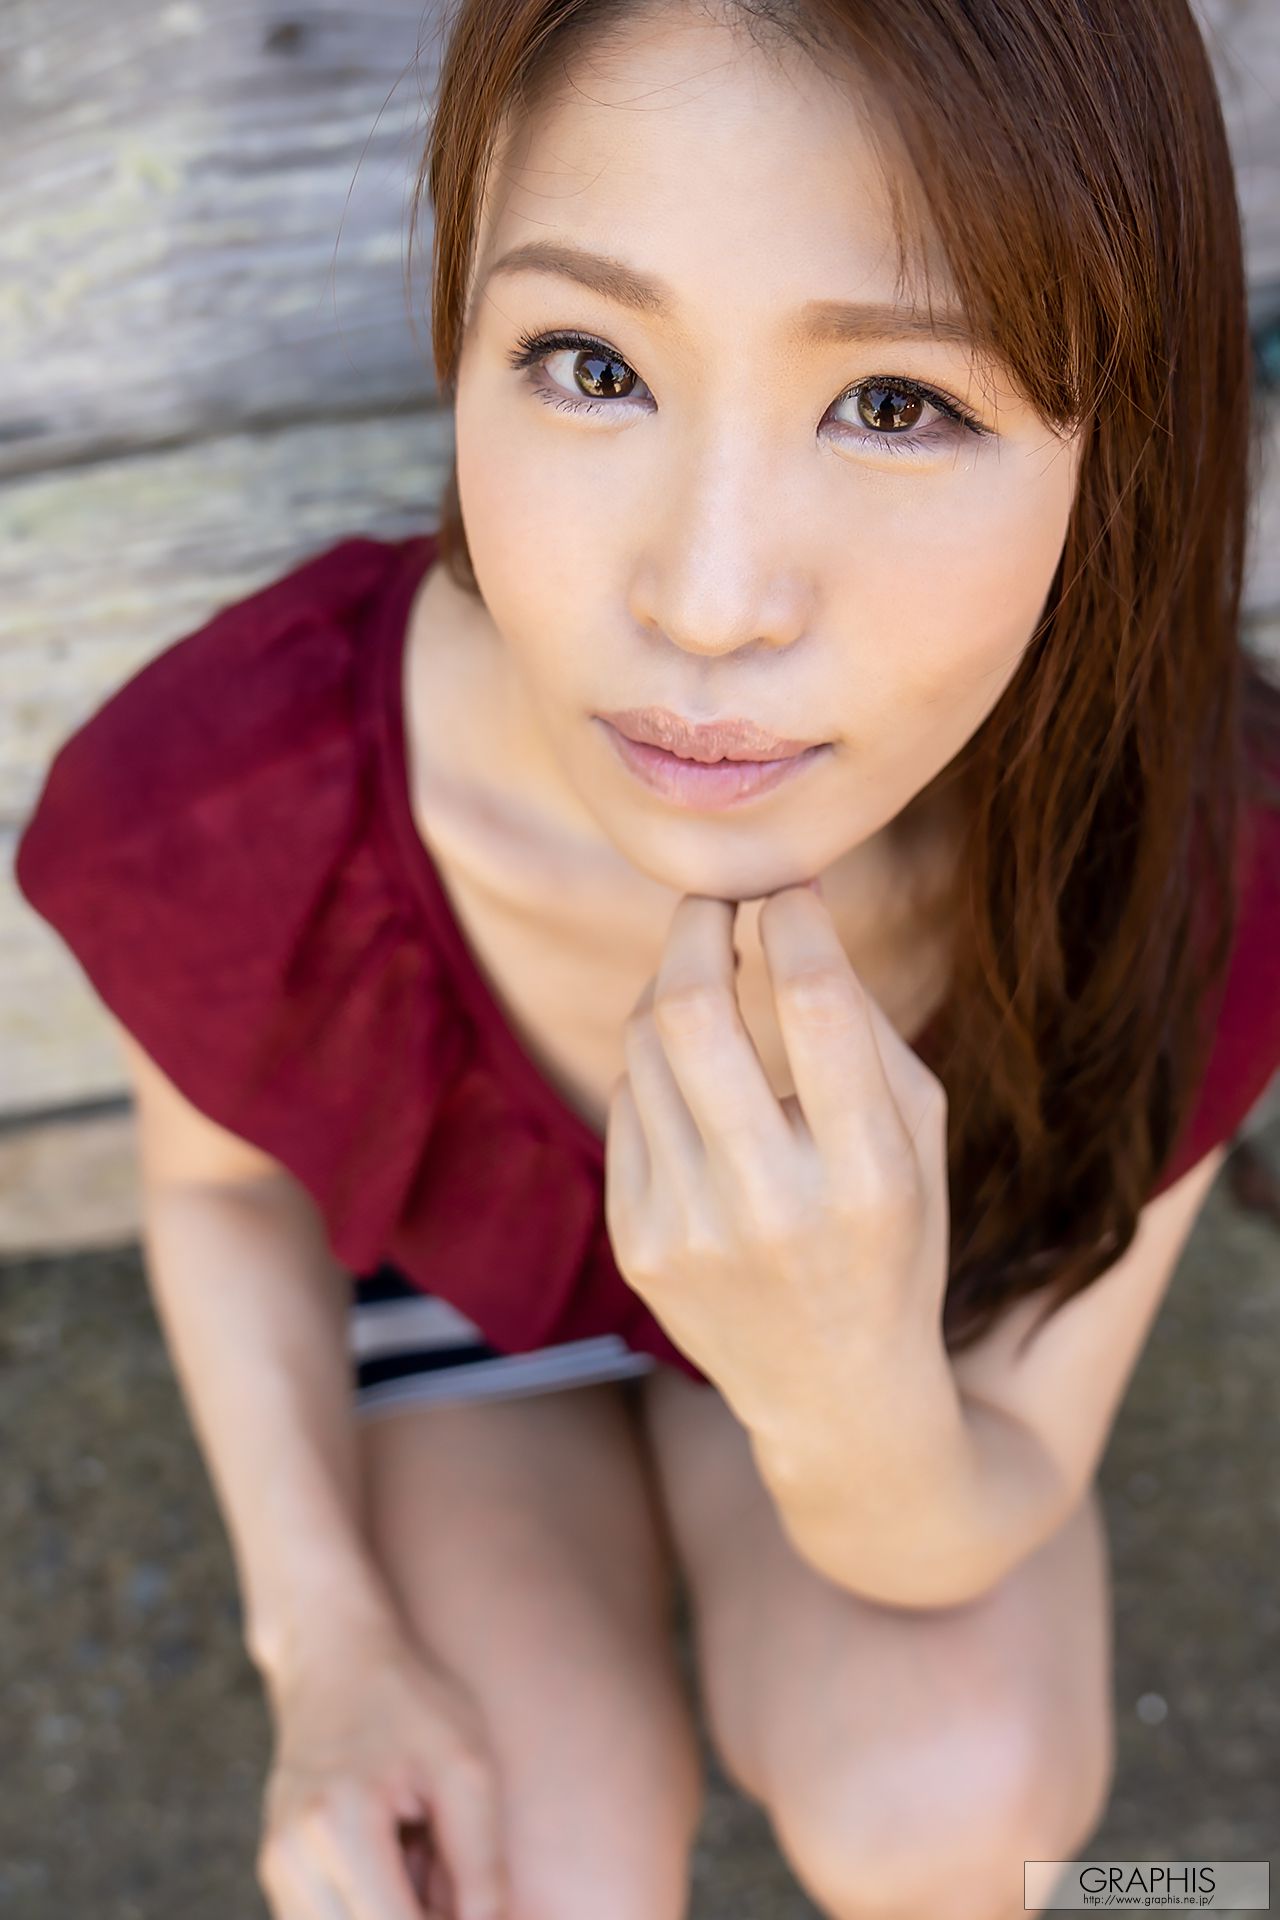 [Graphis] Special Gravure Tsumugi Toka Rinne 凛音とうか Private Affairs  第14张